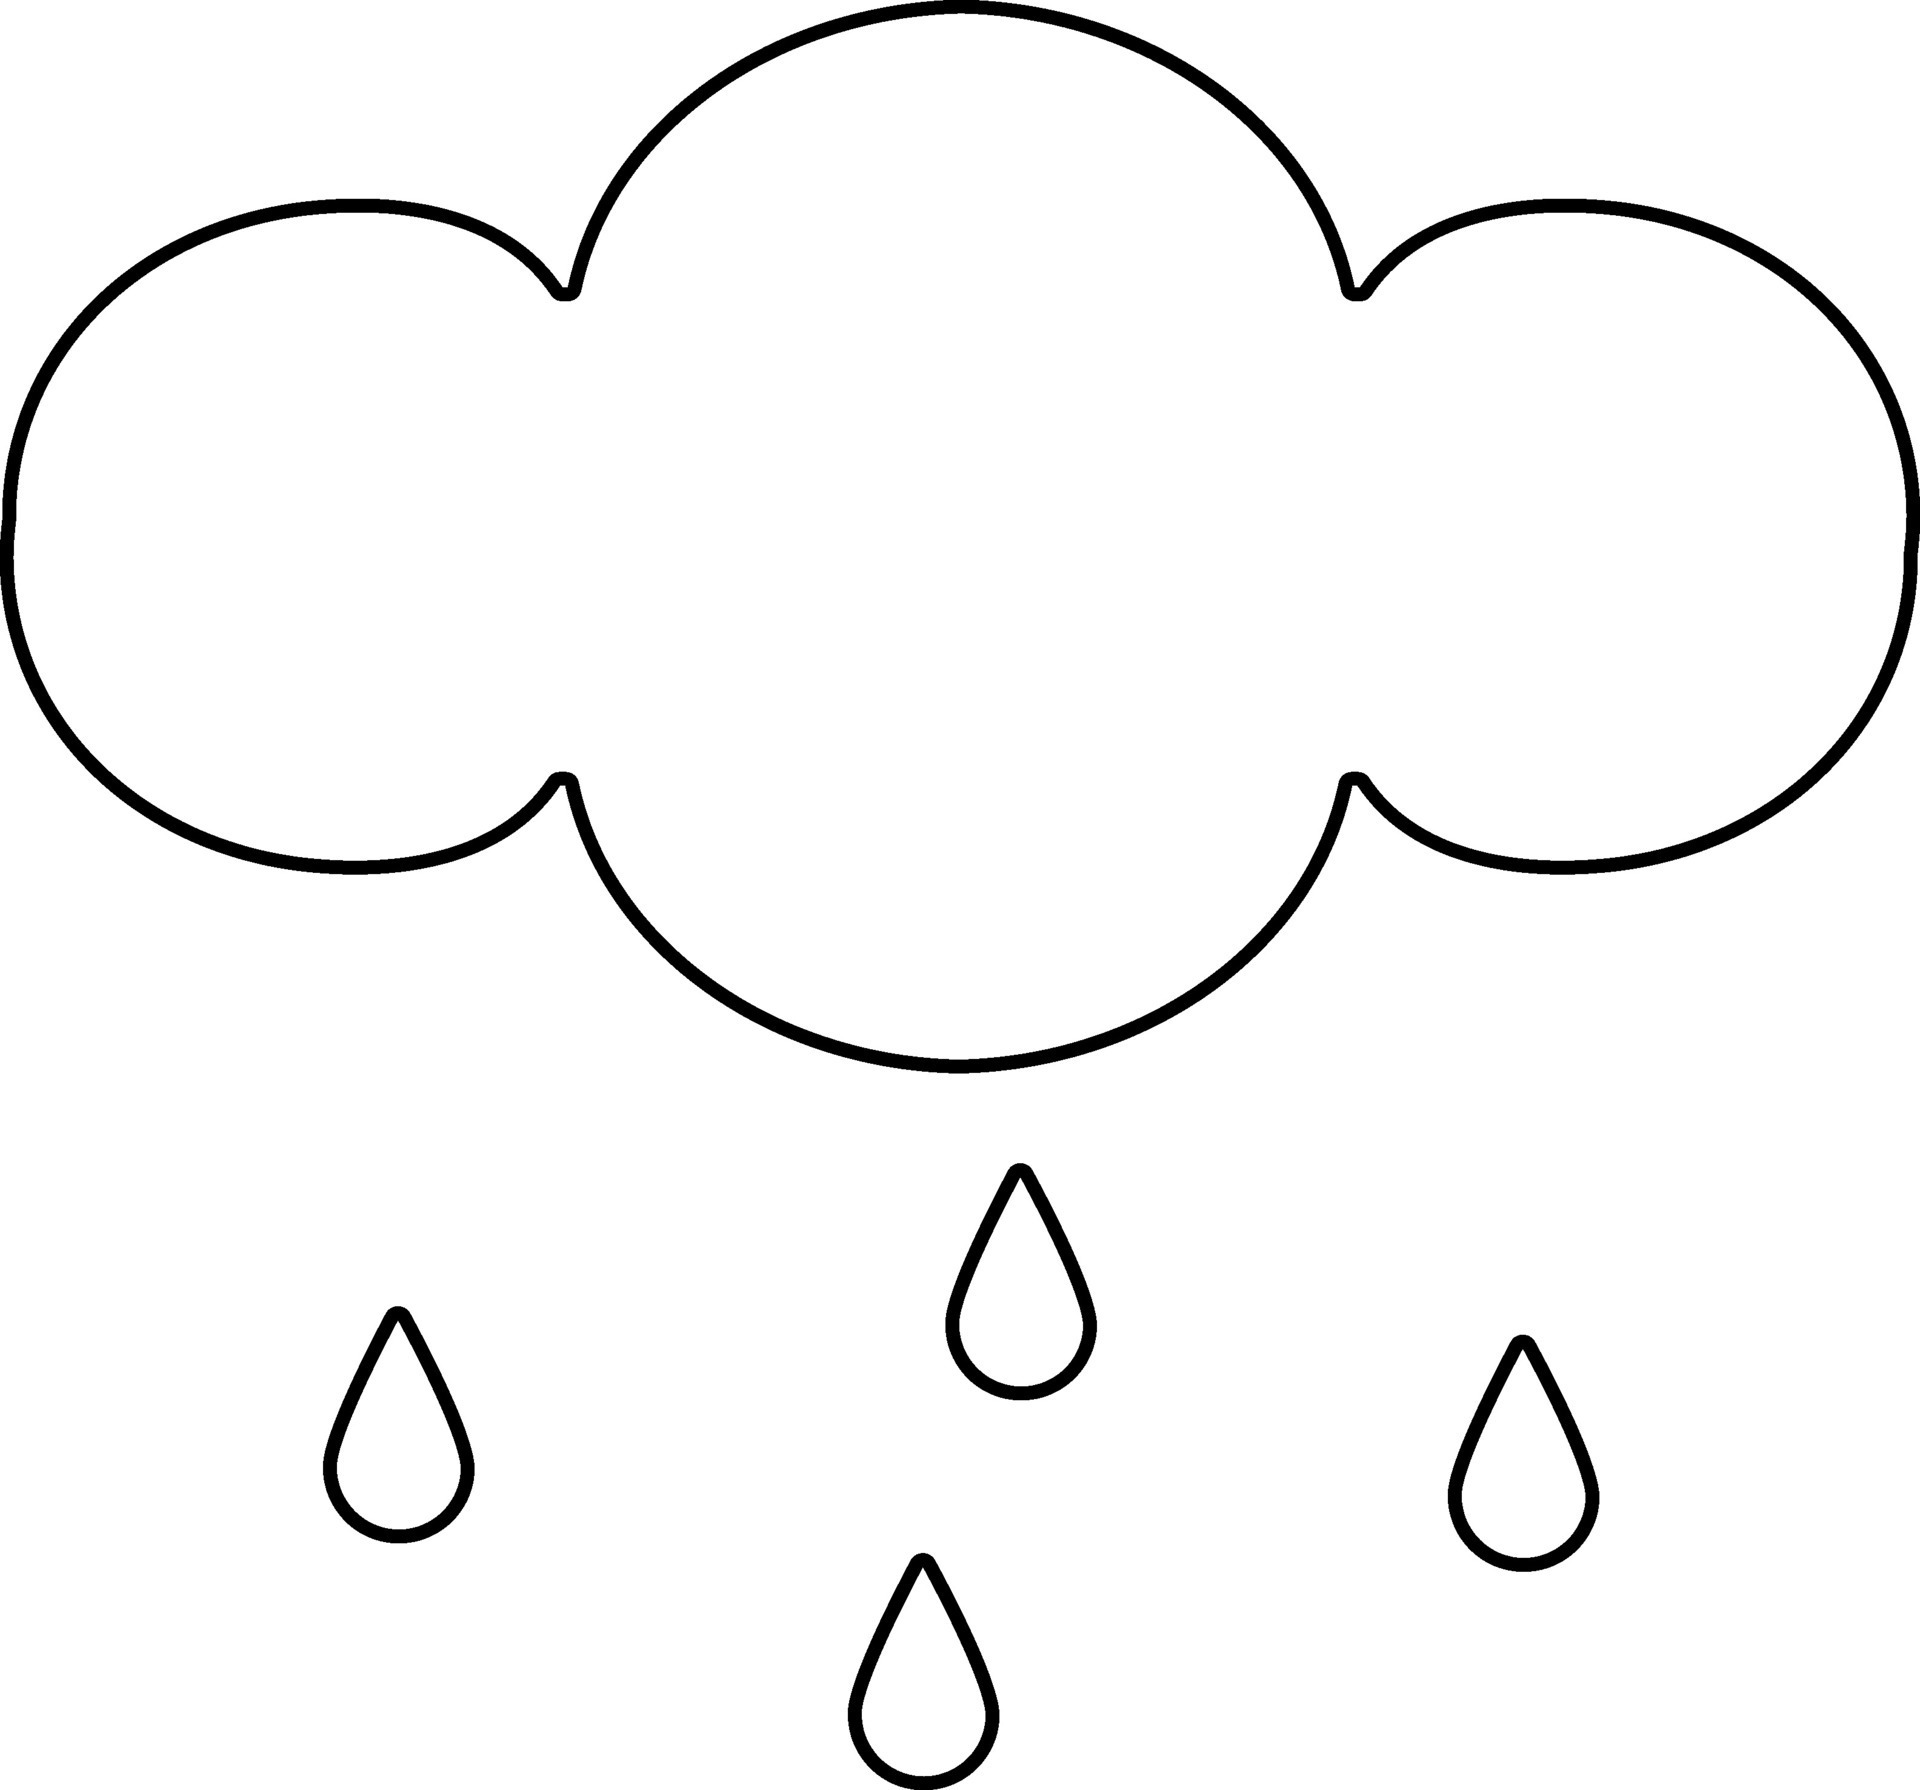 Line art icon of Rainy cloud for monsoon weather concept. 24840064 ...